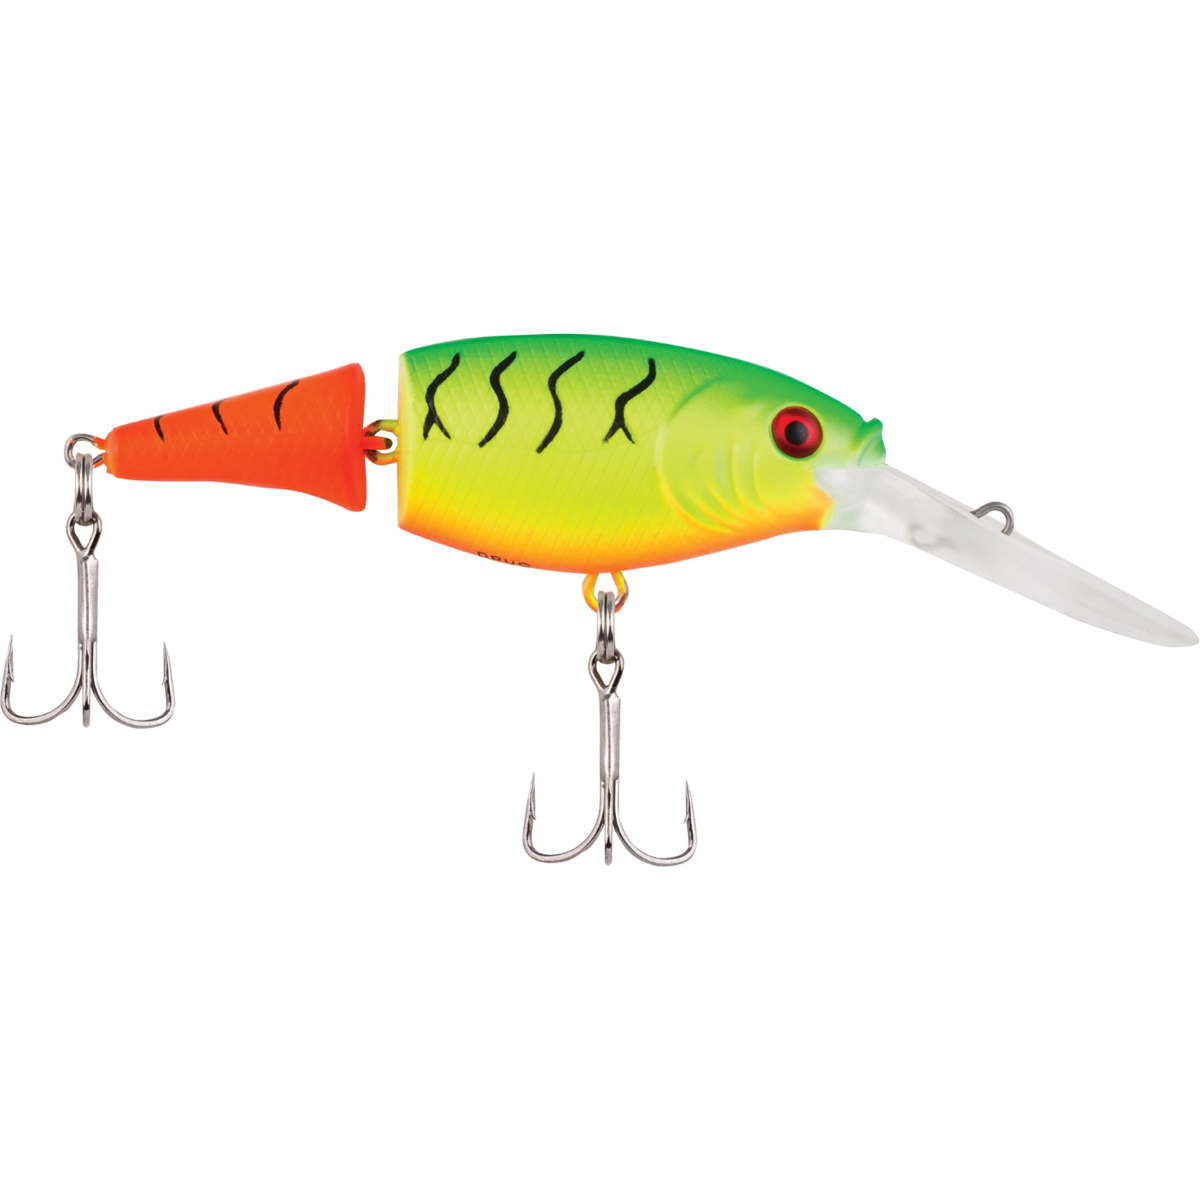 Photo of Berkley Flicker Shad Jointed for sale at United Tackle Shops.